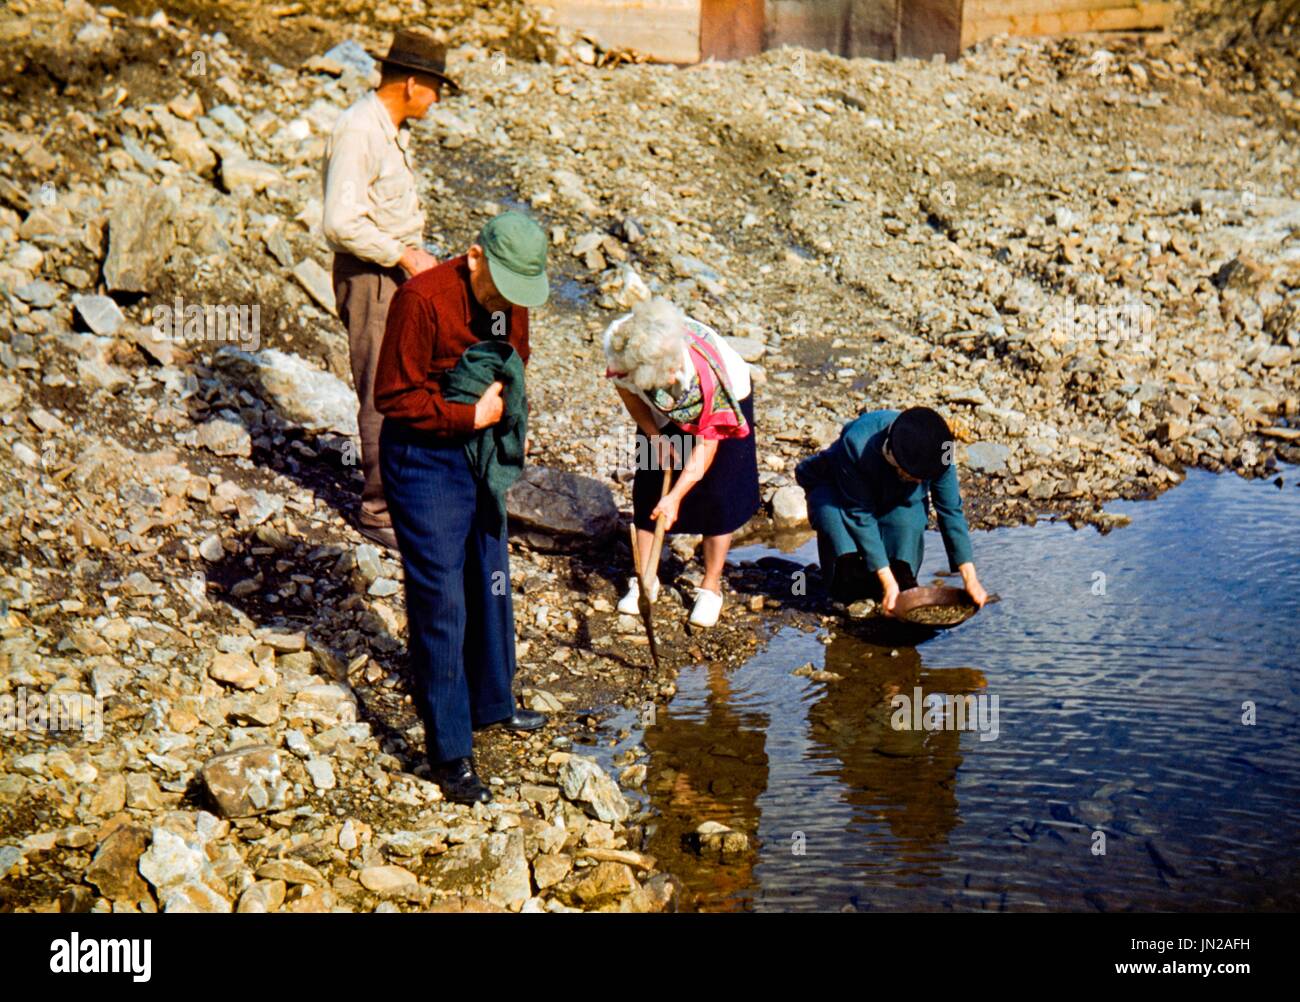 A family of mature tourists pans for gold in Deadwood Brook near the Homestake Mine, site of the Black Hills Gold Rush, South Dakota, United States, June 24, 1948. Stock Photo